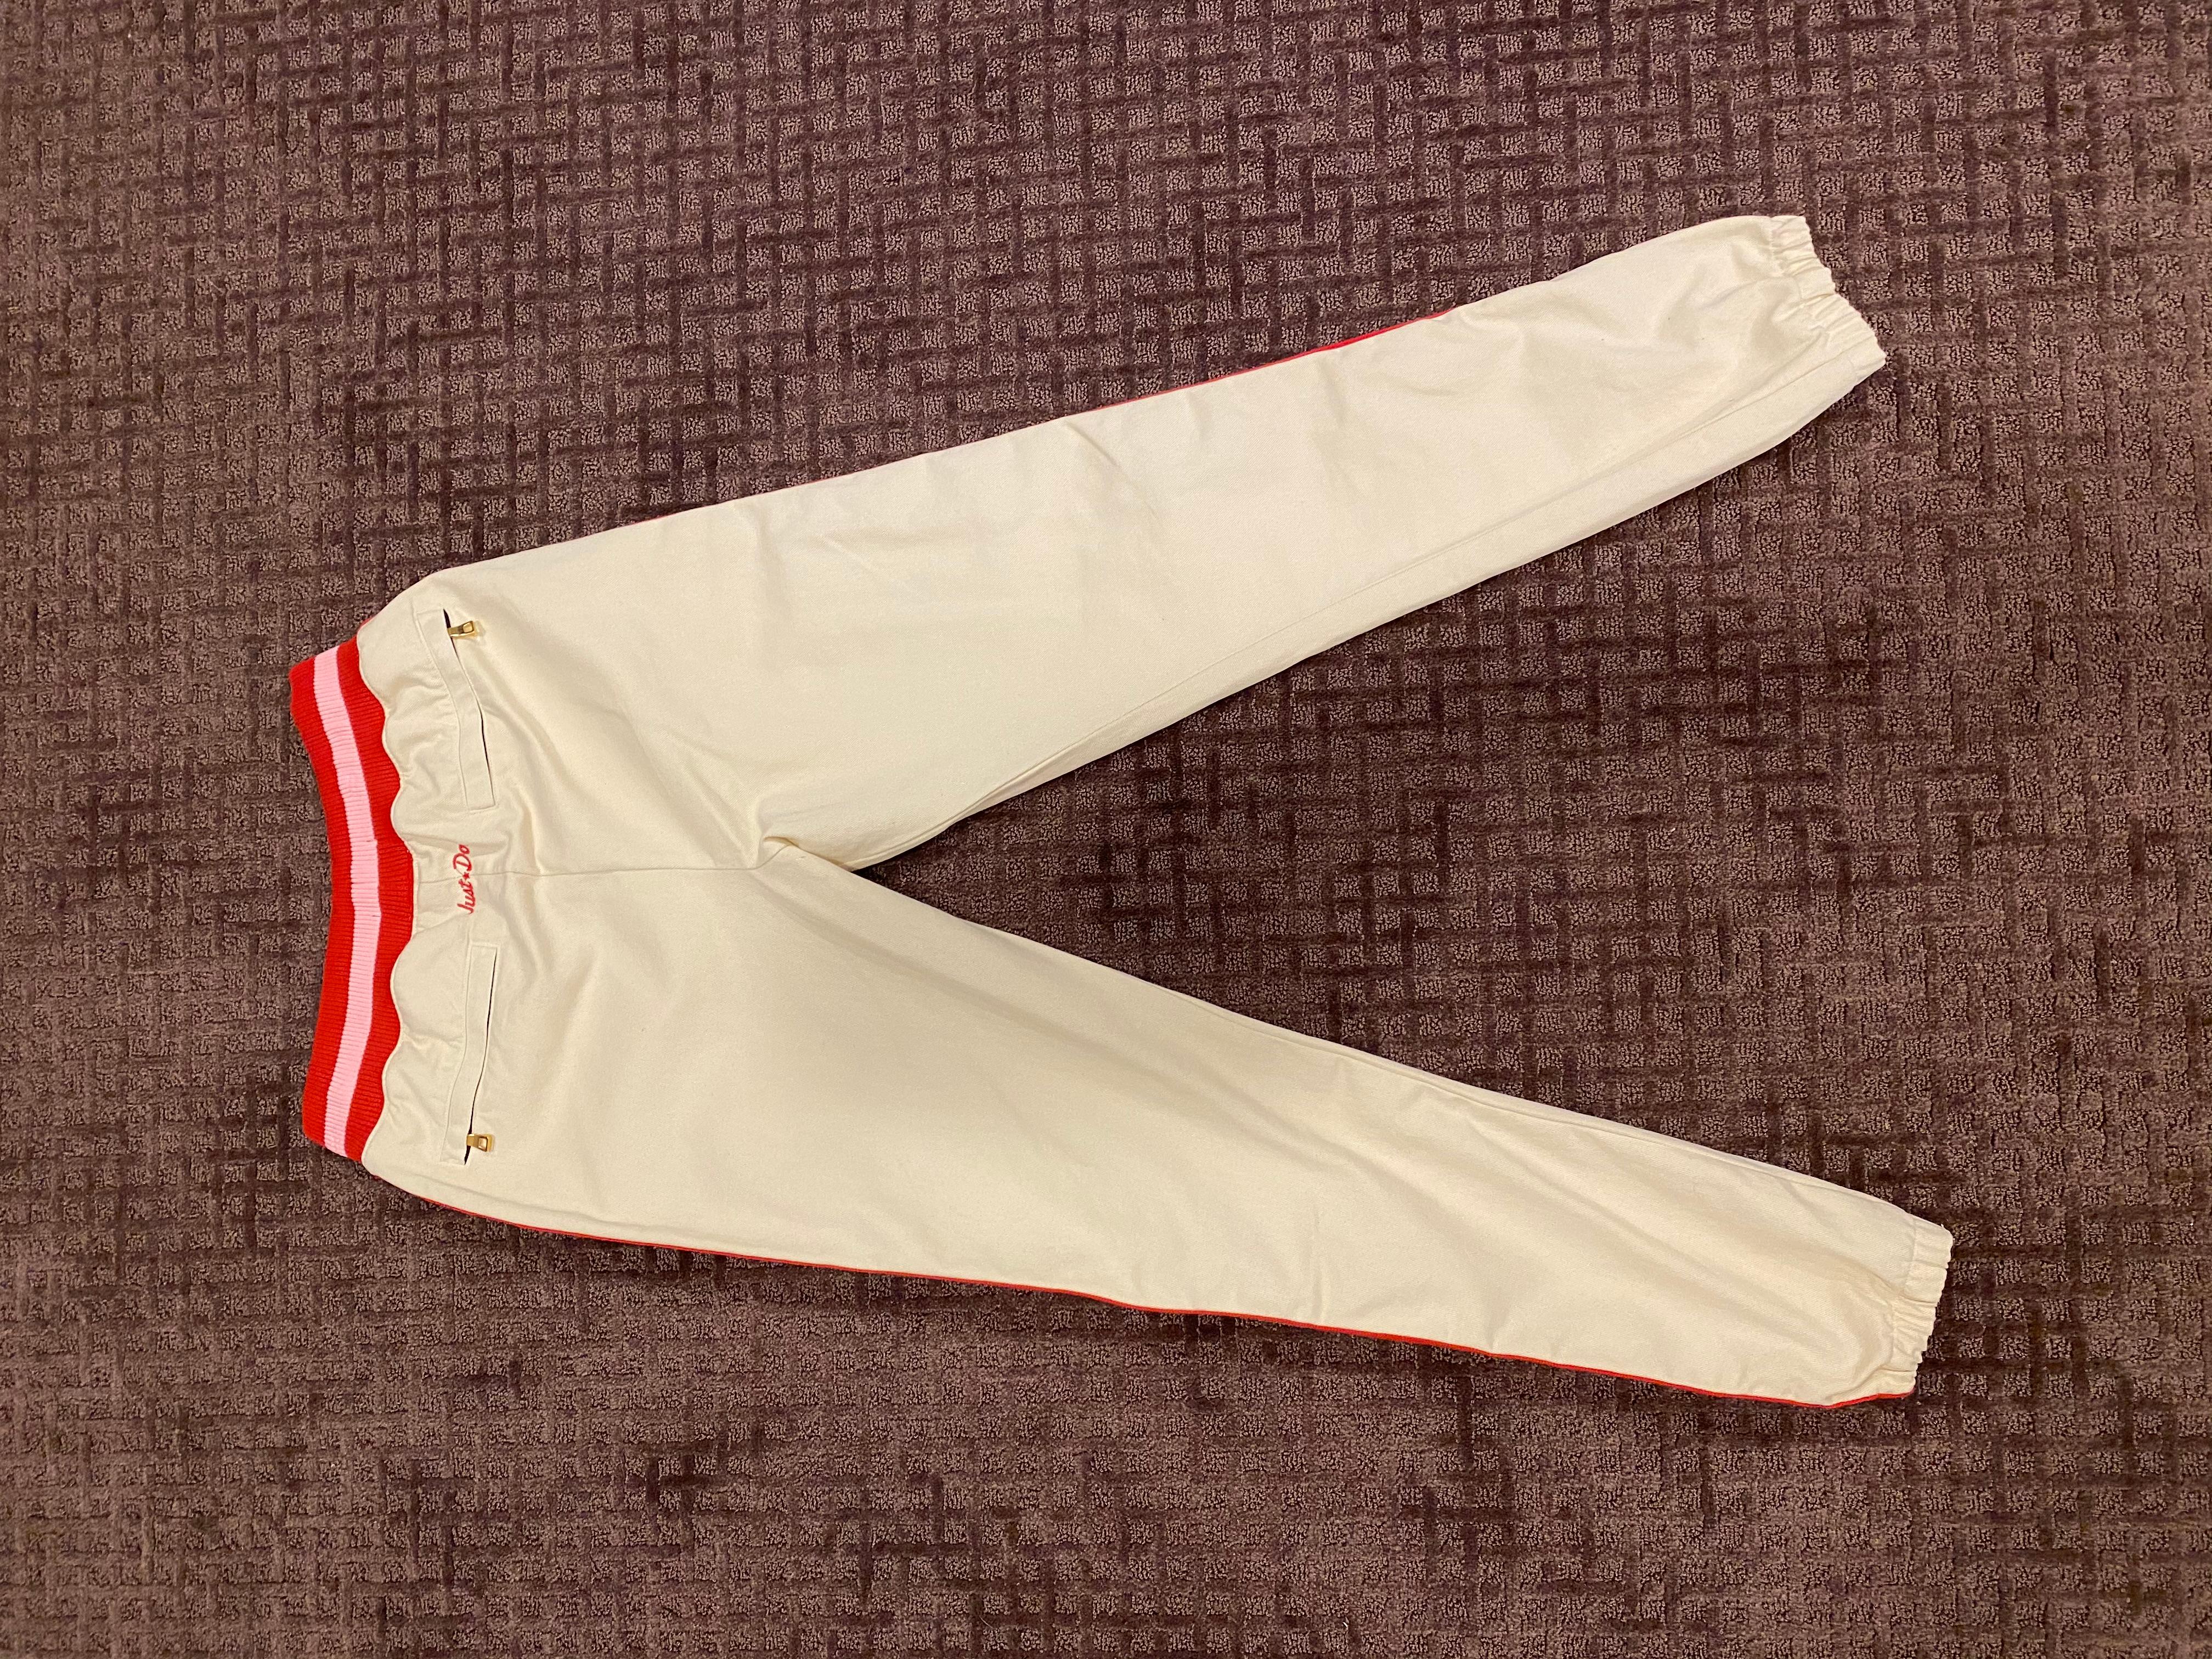 Size Large
Just Don Jogger pant
Very well crafted Piece
Very rare and hard to come across
These were released at the time of the just don jordan 2 “artic orange”.

All sales final